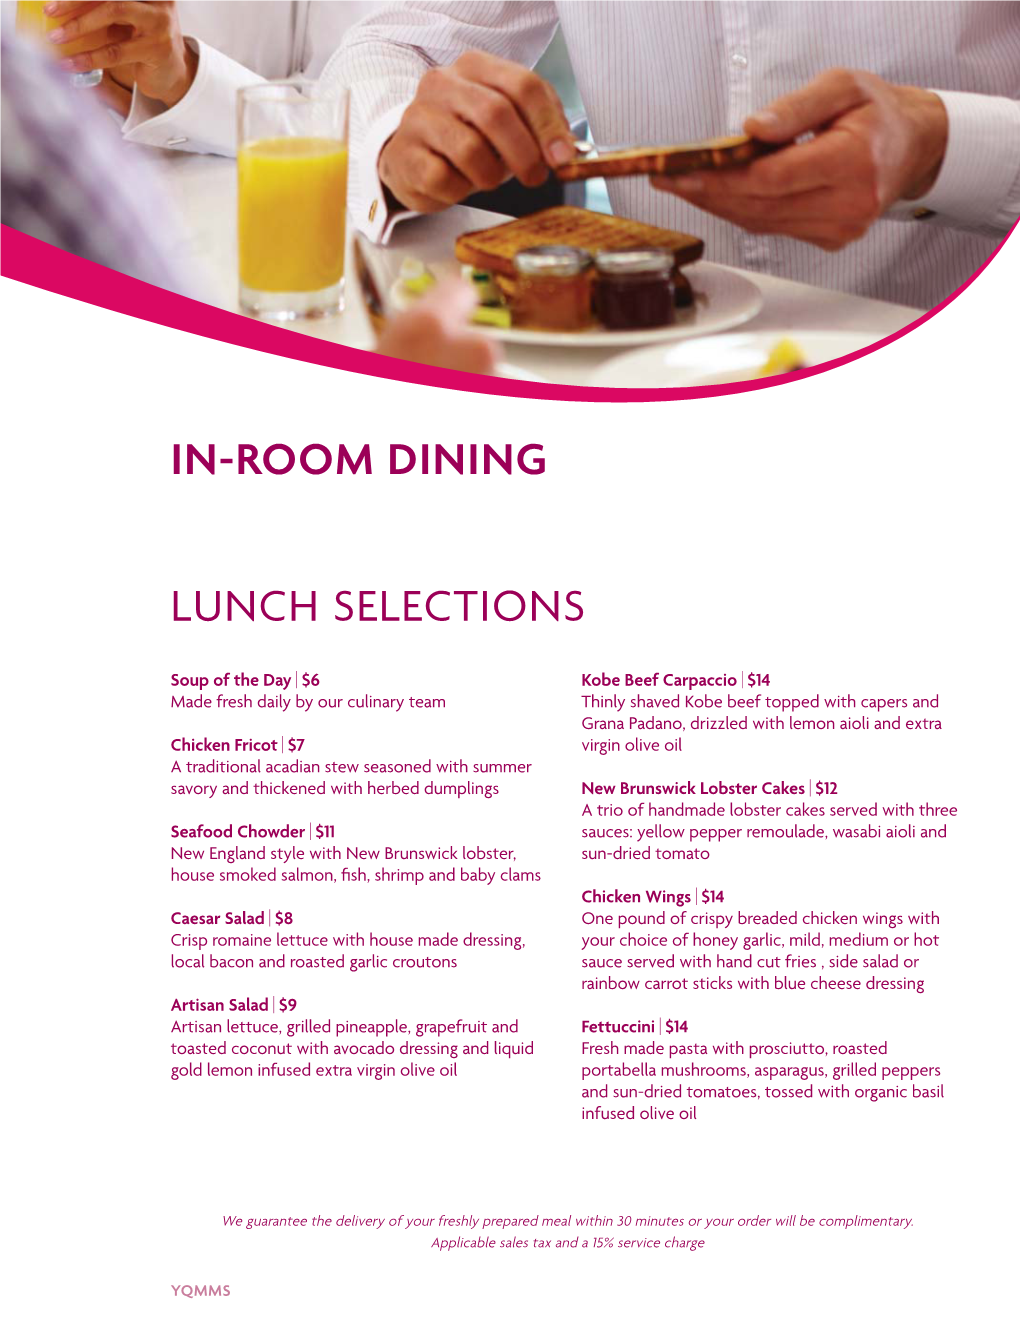 In-Room Dining Lunch Selections